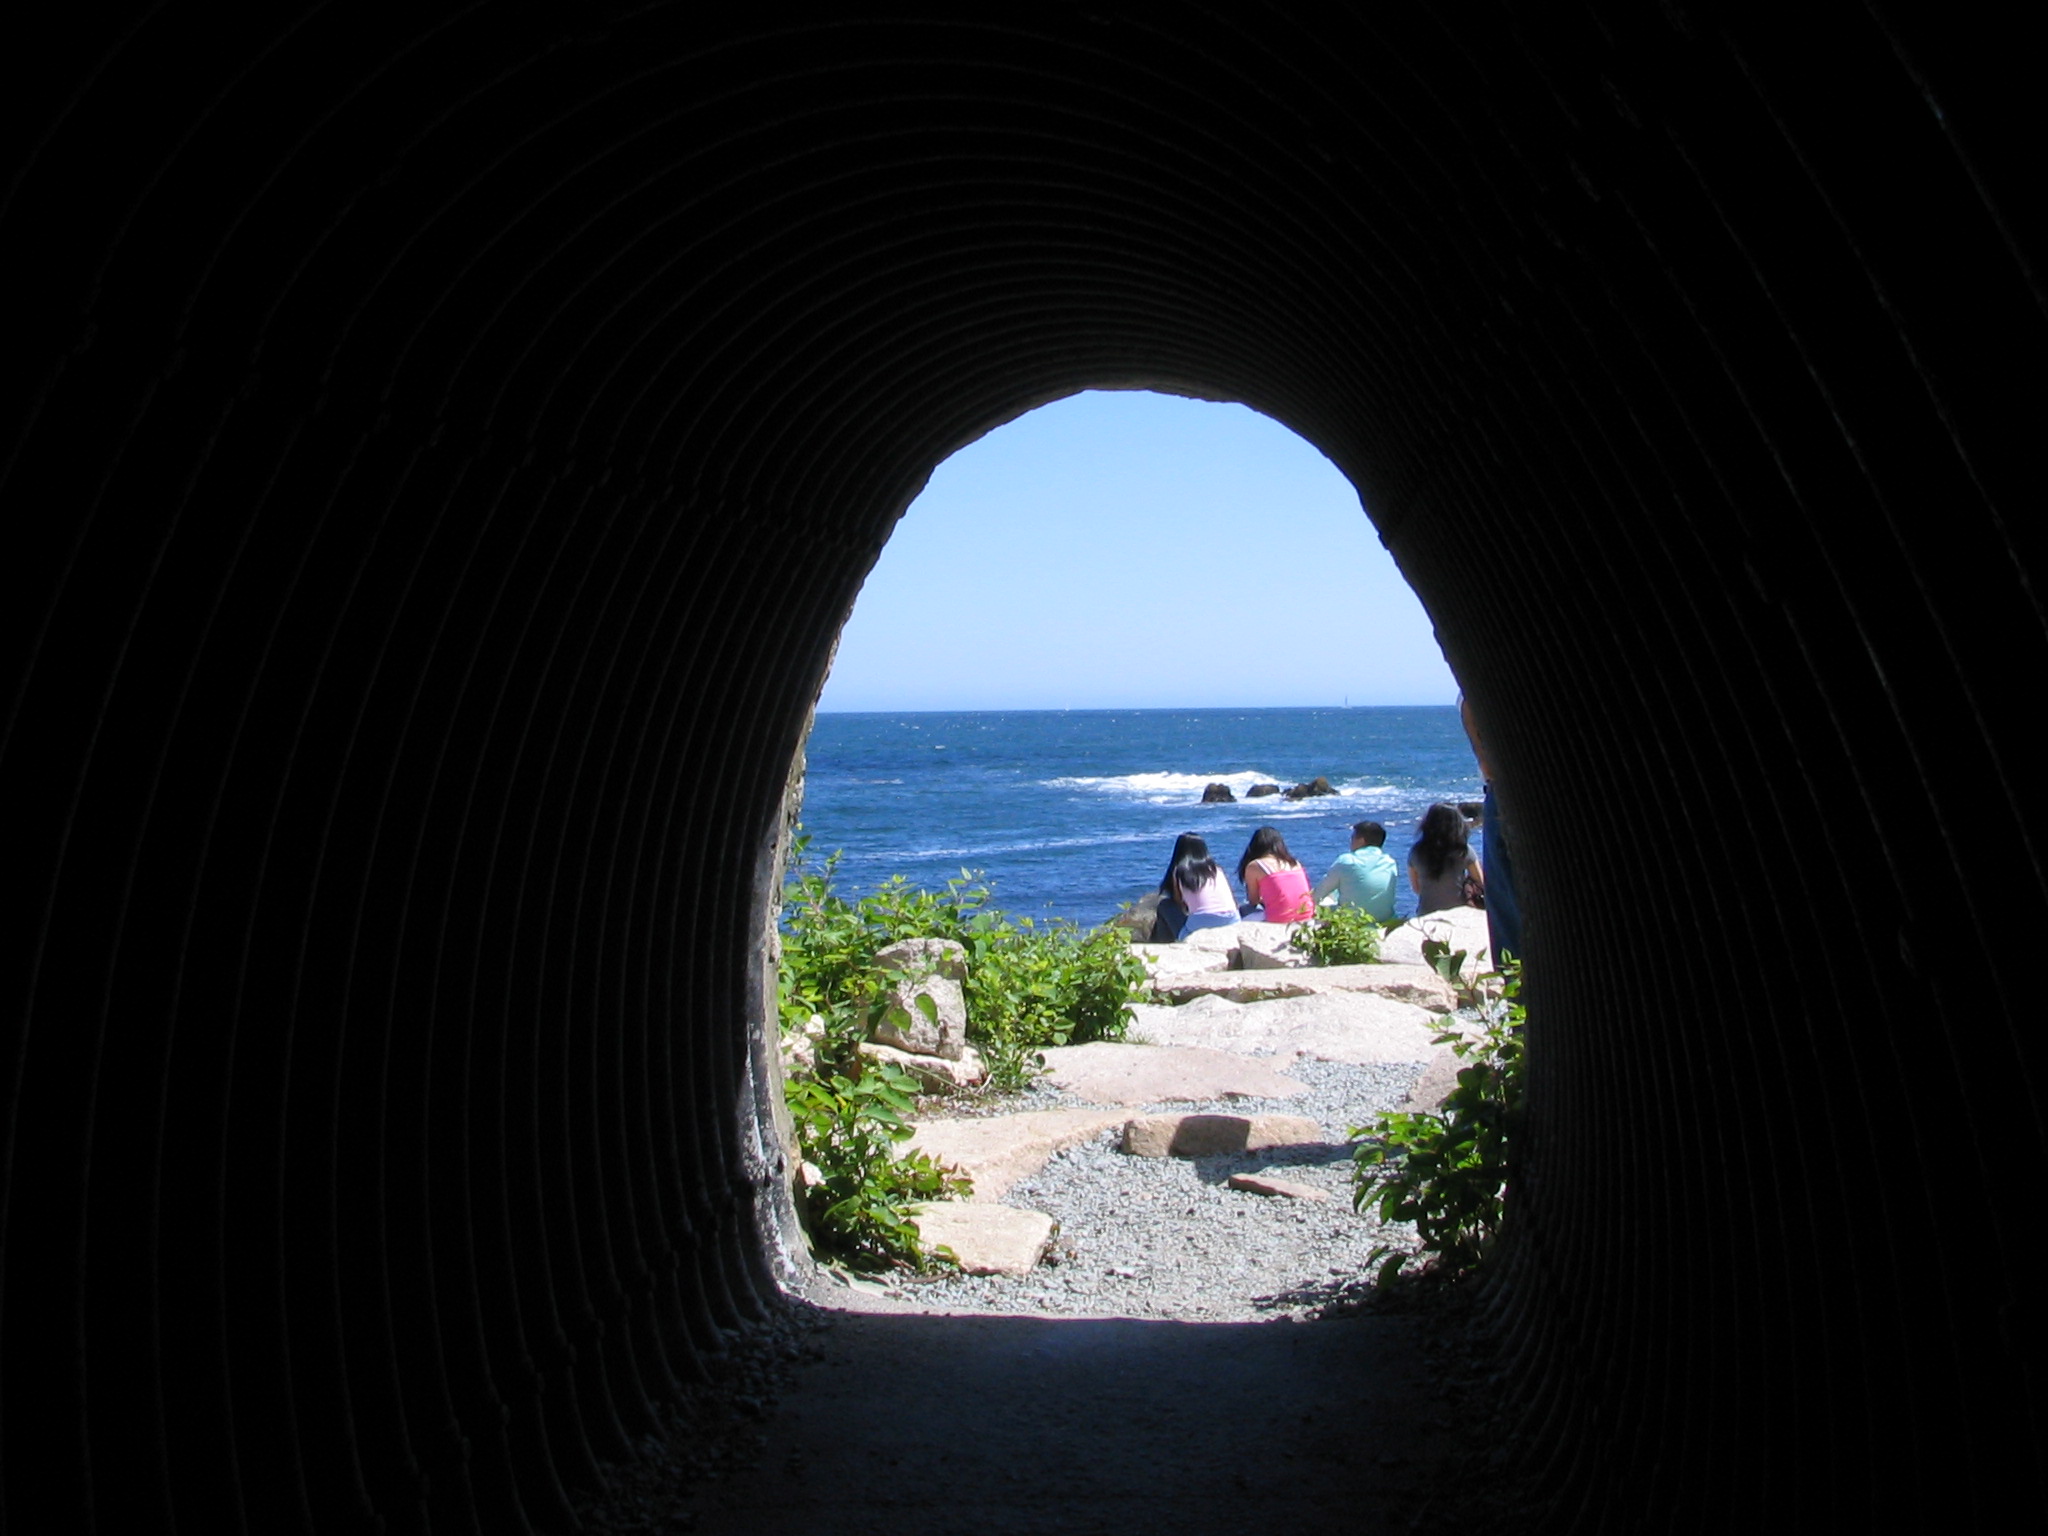 At The End Of The Tunnel On Cliff Walk (user submitted)